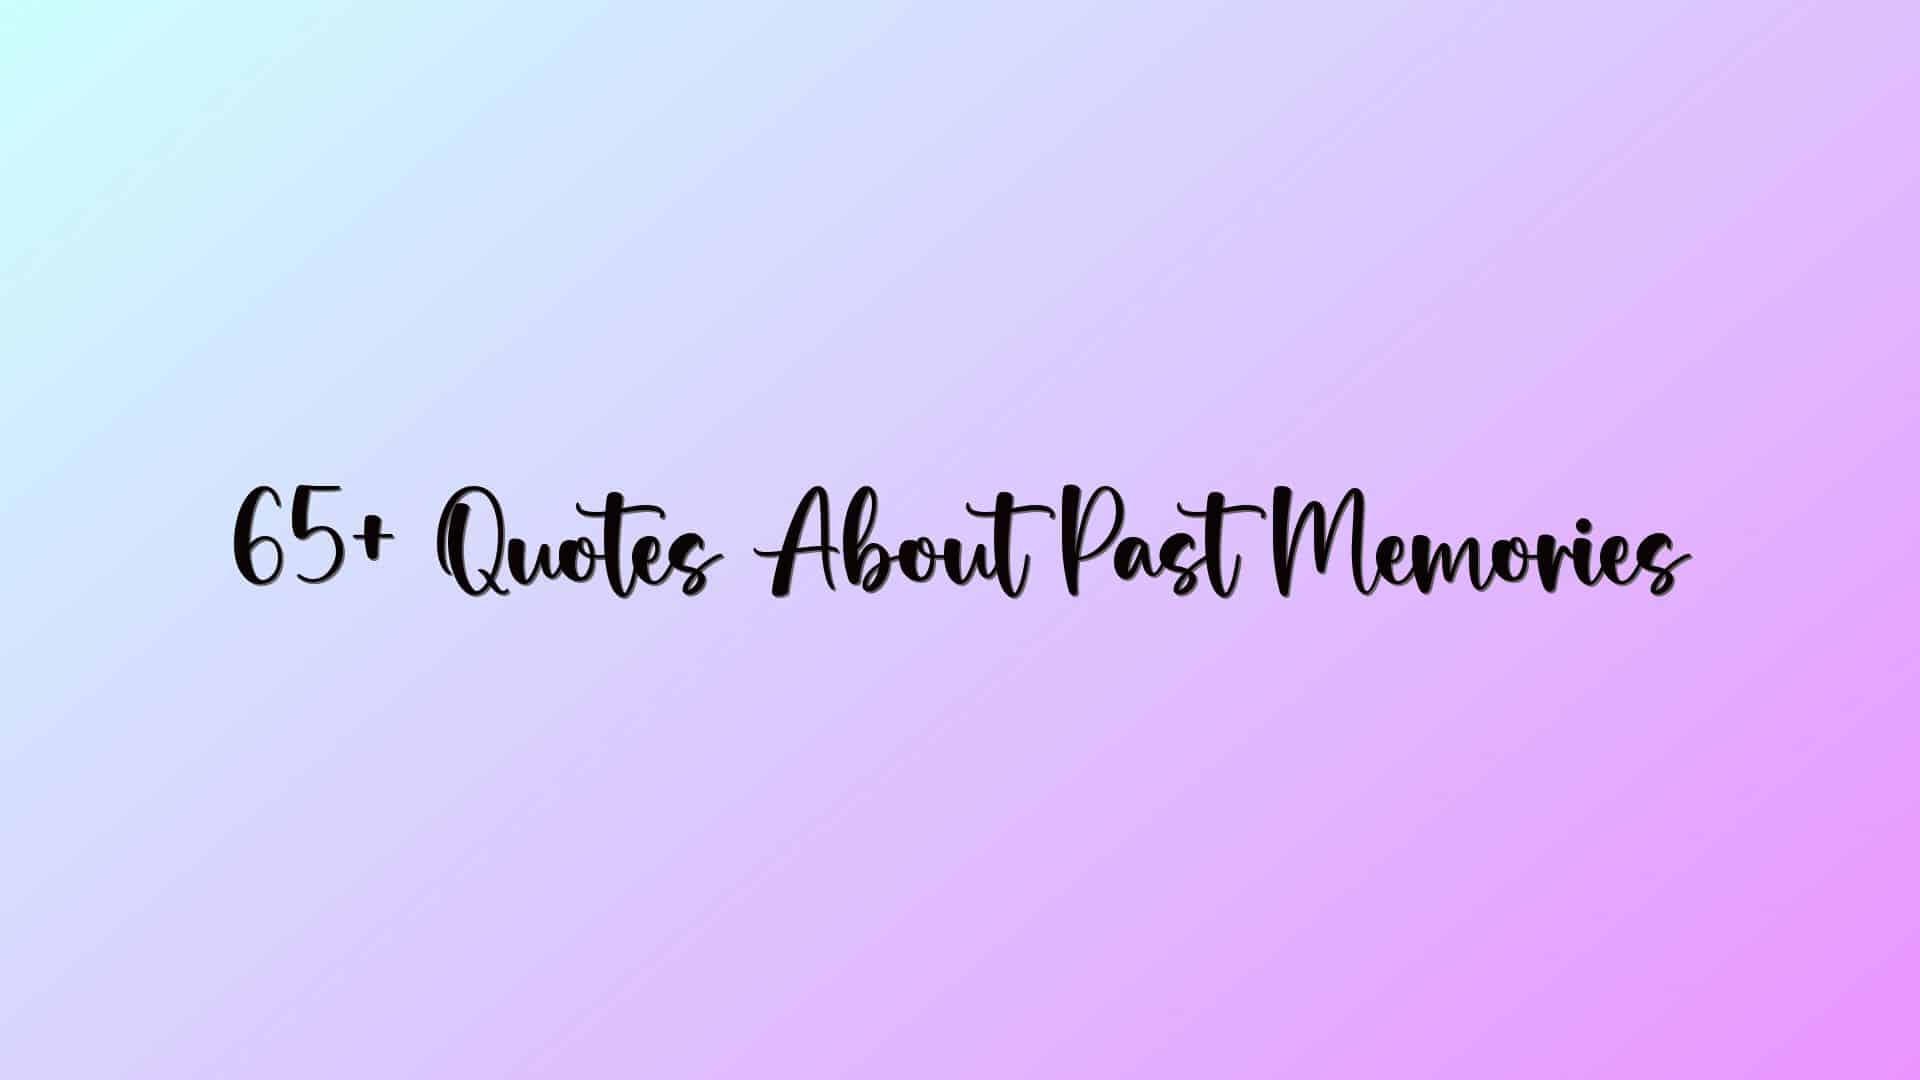 65+ Quotes About Past Memories